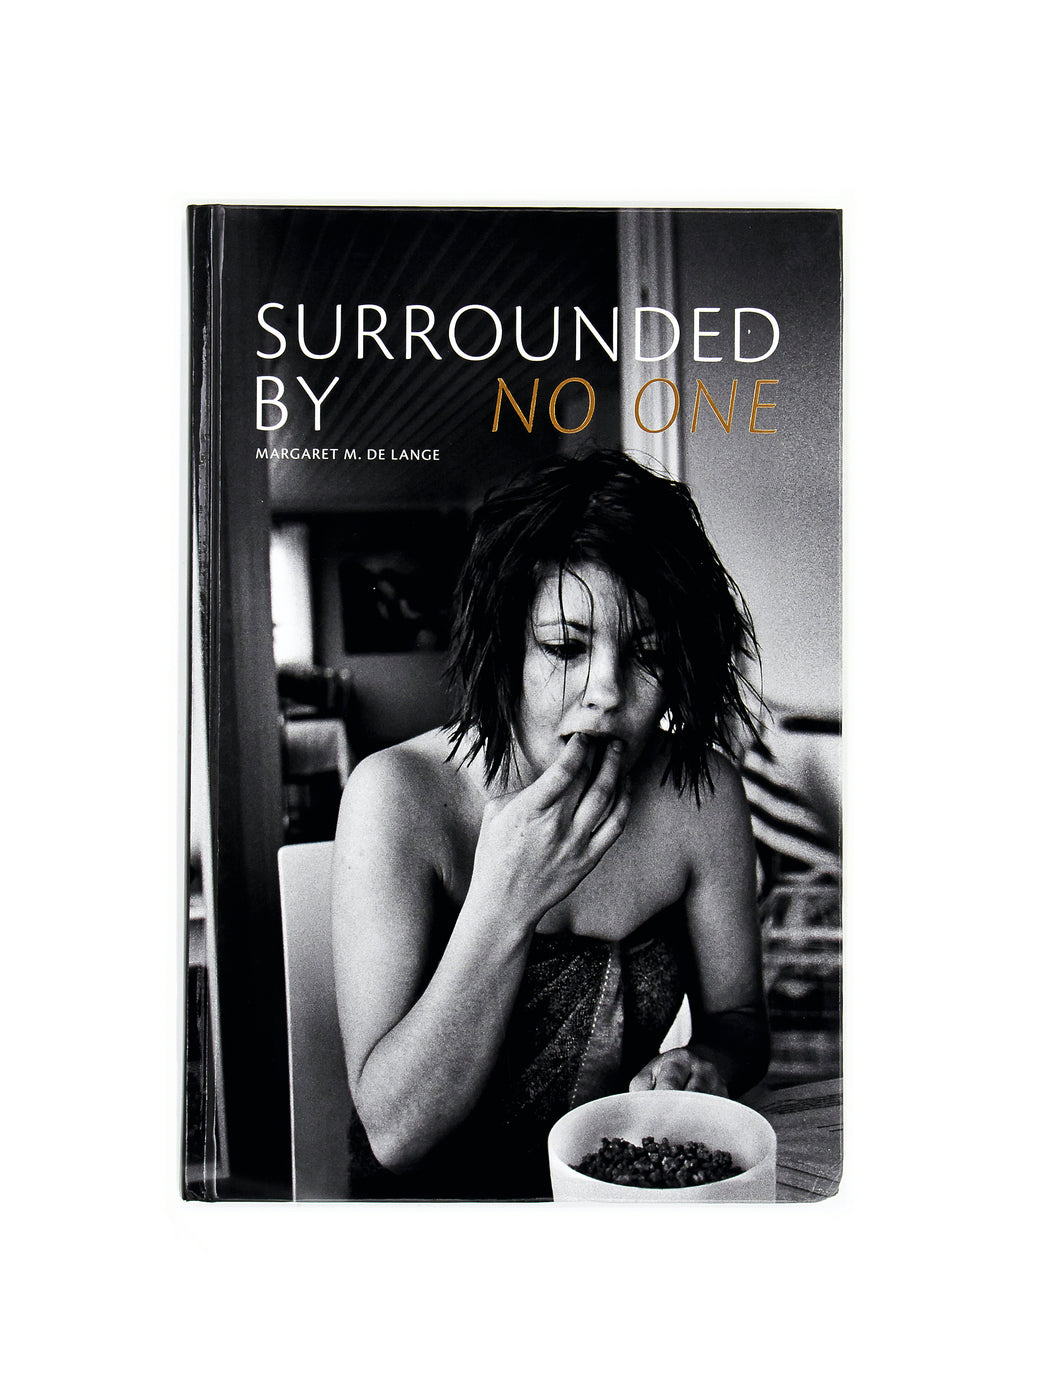 SURROUNDED BY NO ONE by Margaret M. De Lange